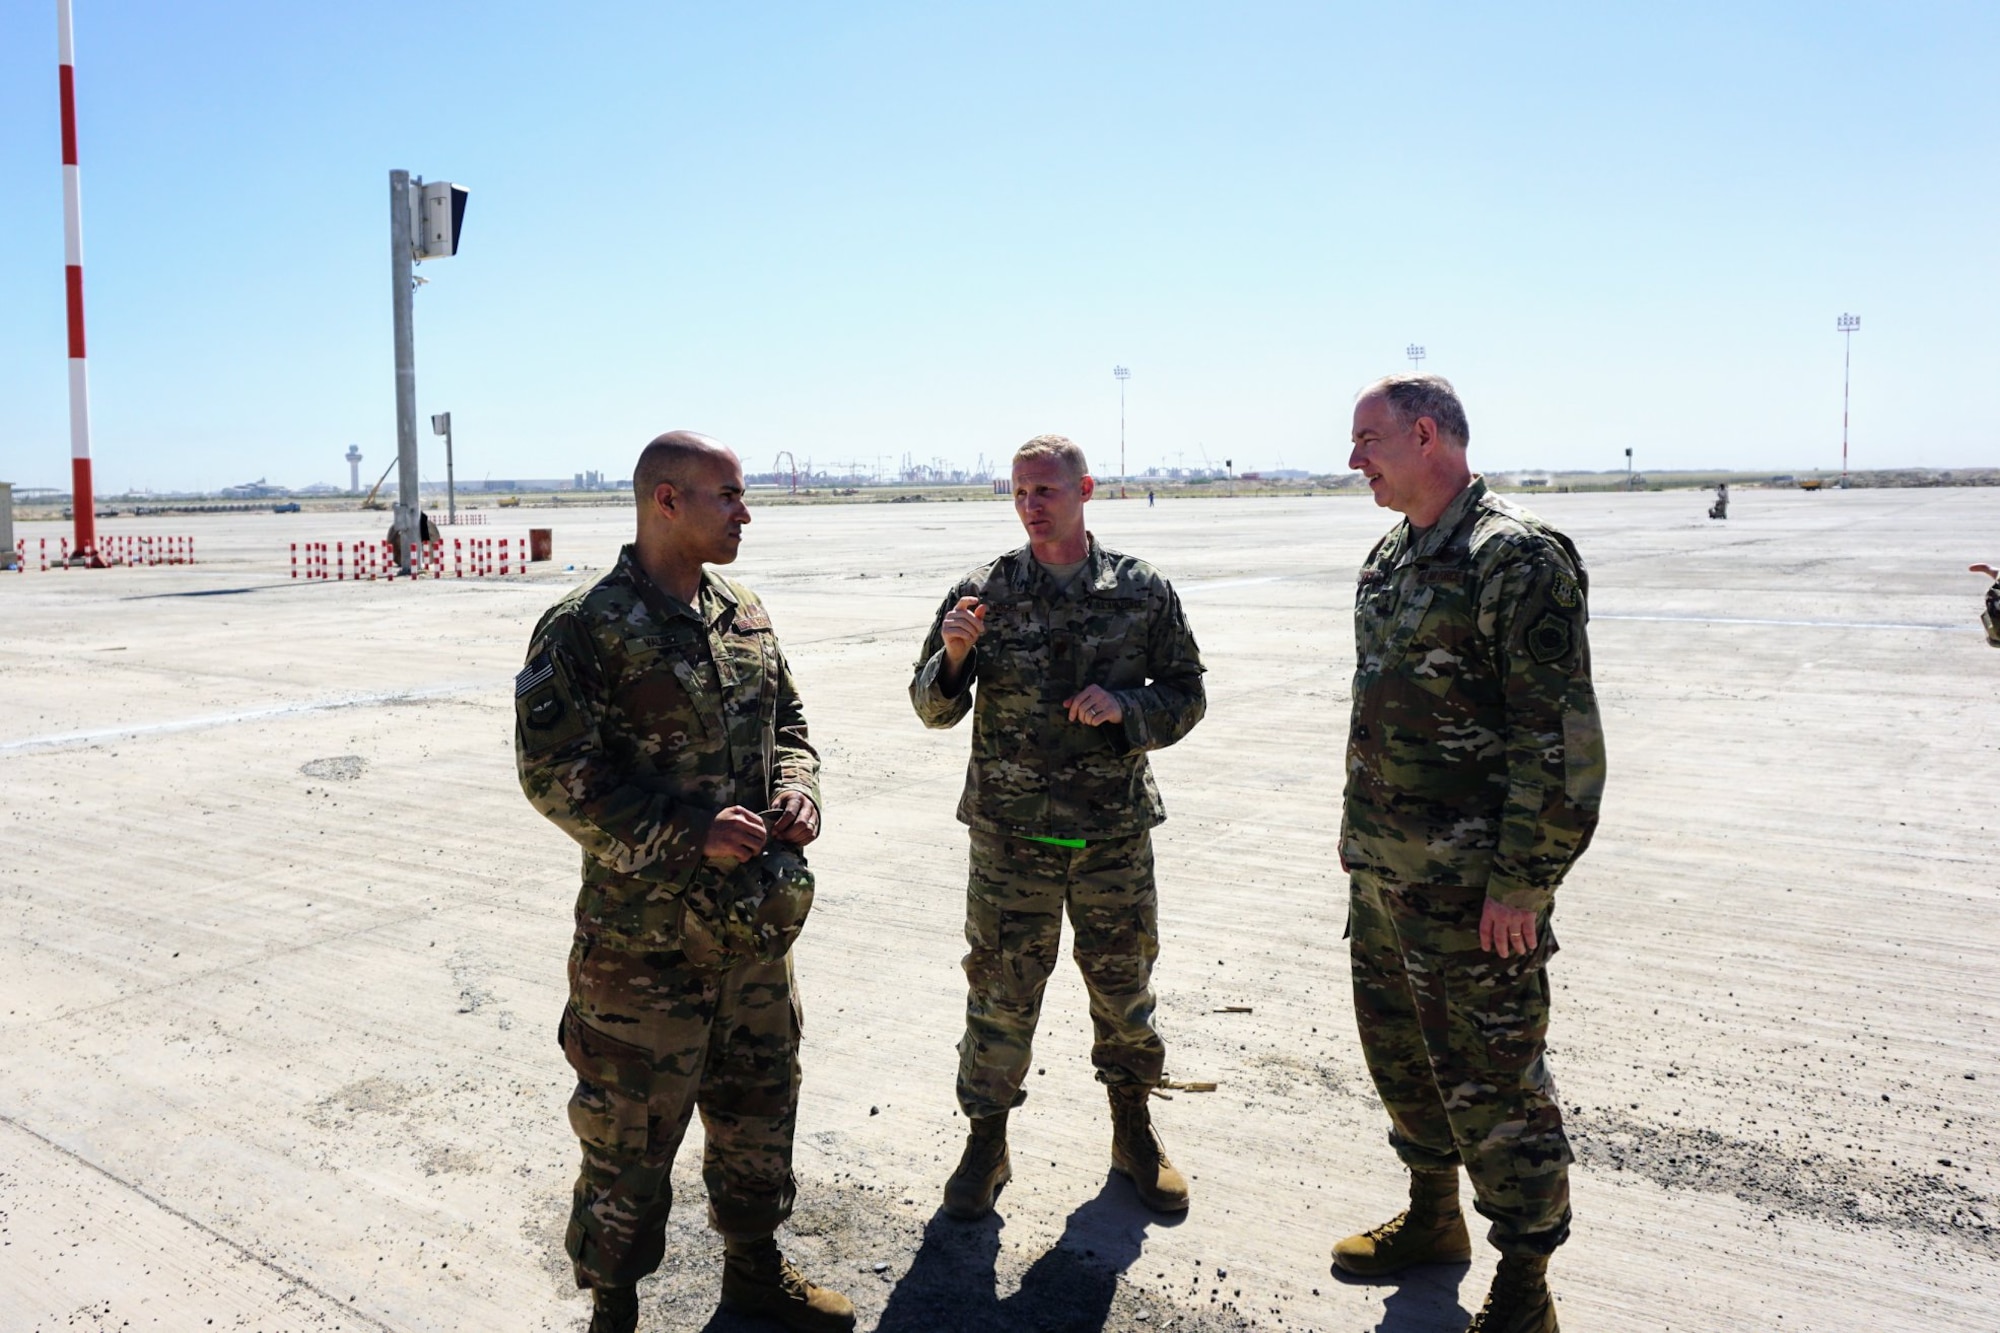 U.S. Air Force Expeditionary Center Command Team Visit 521st Air Mobility Operations Wing